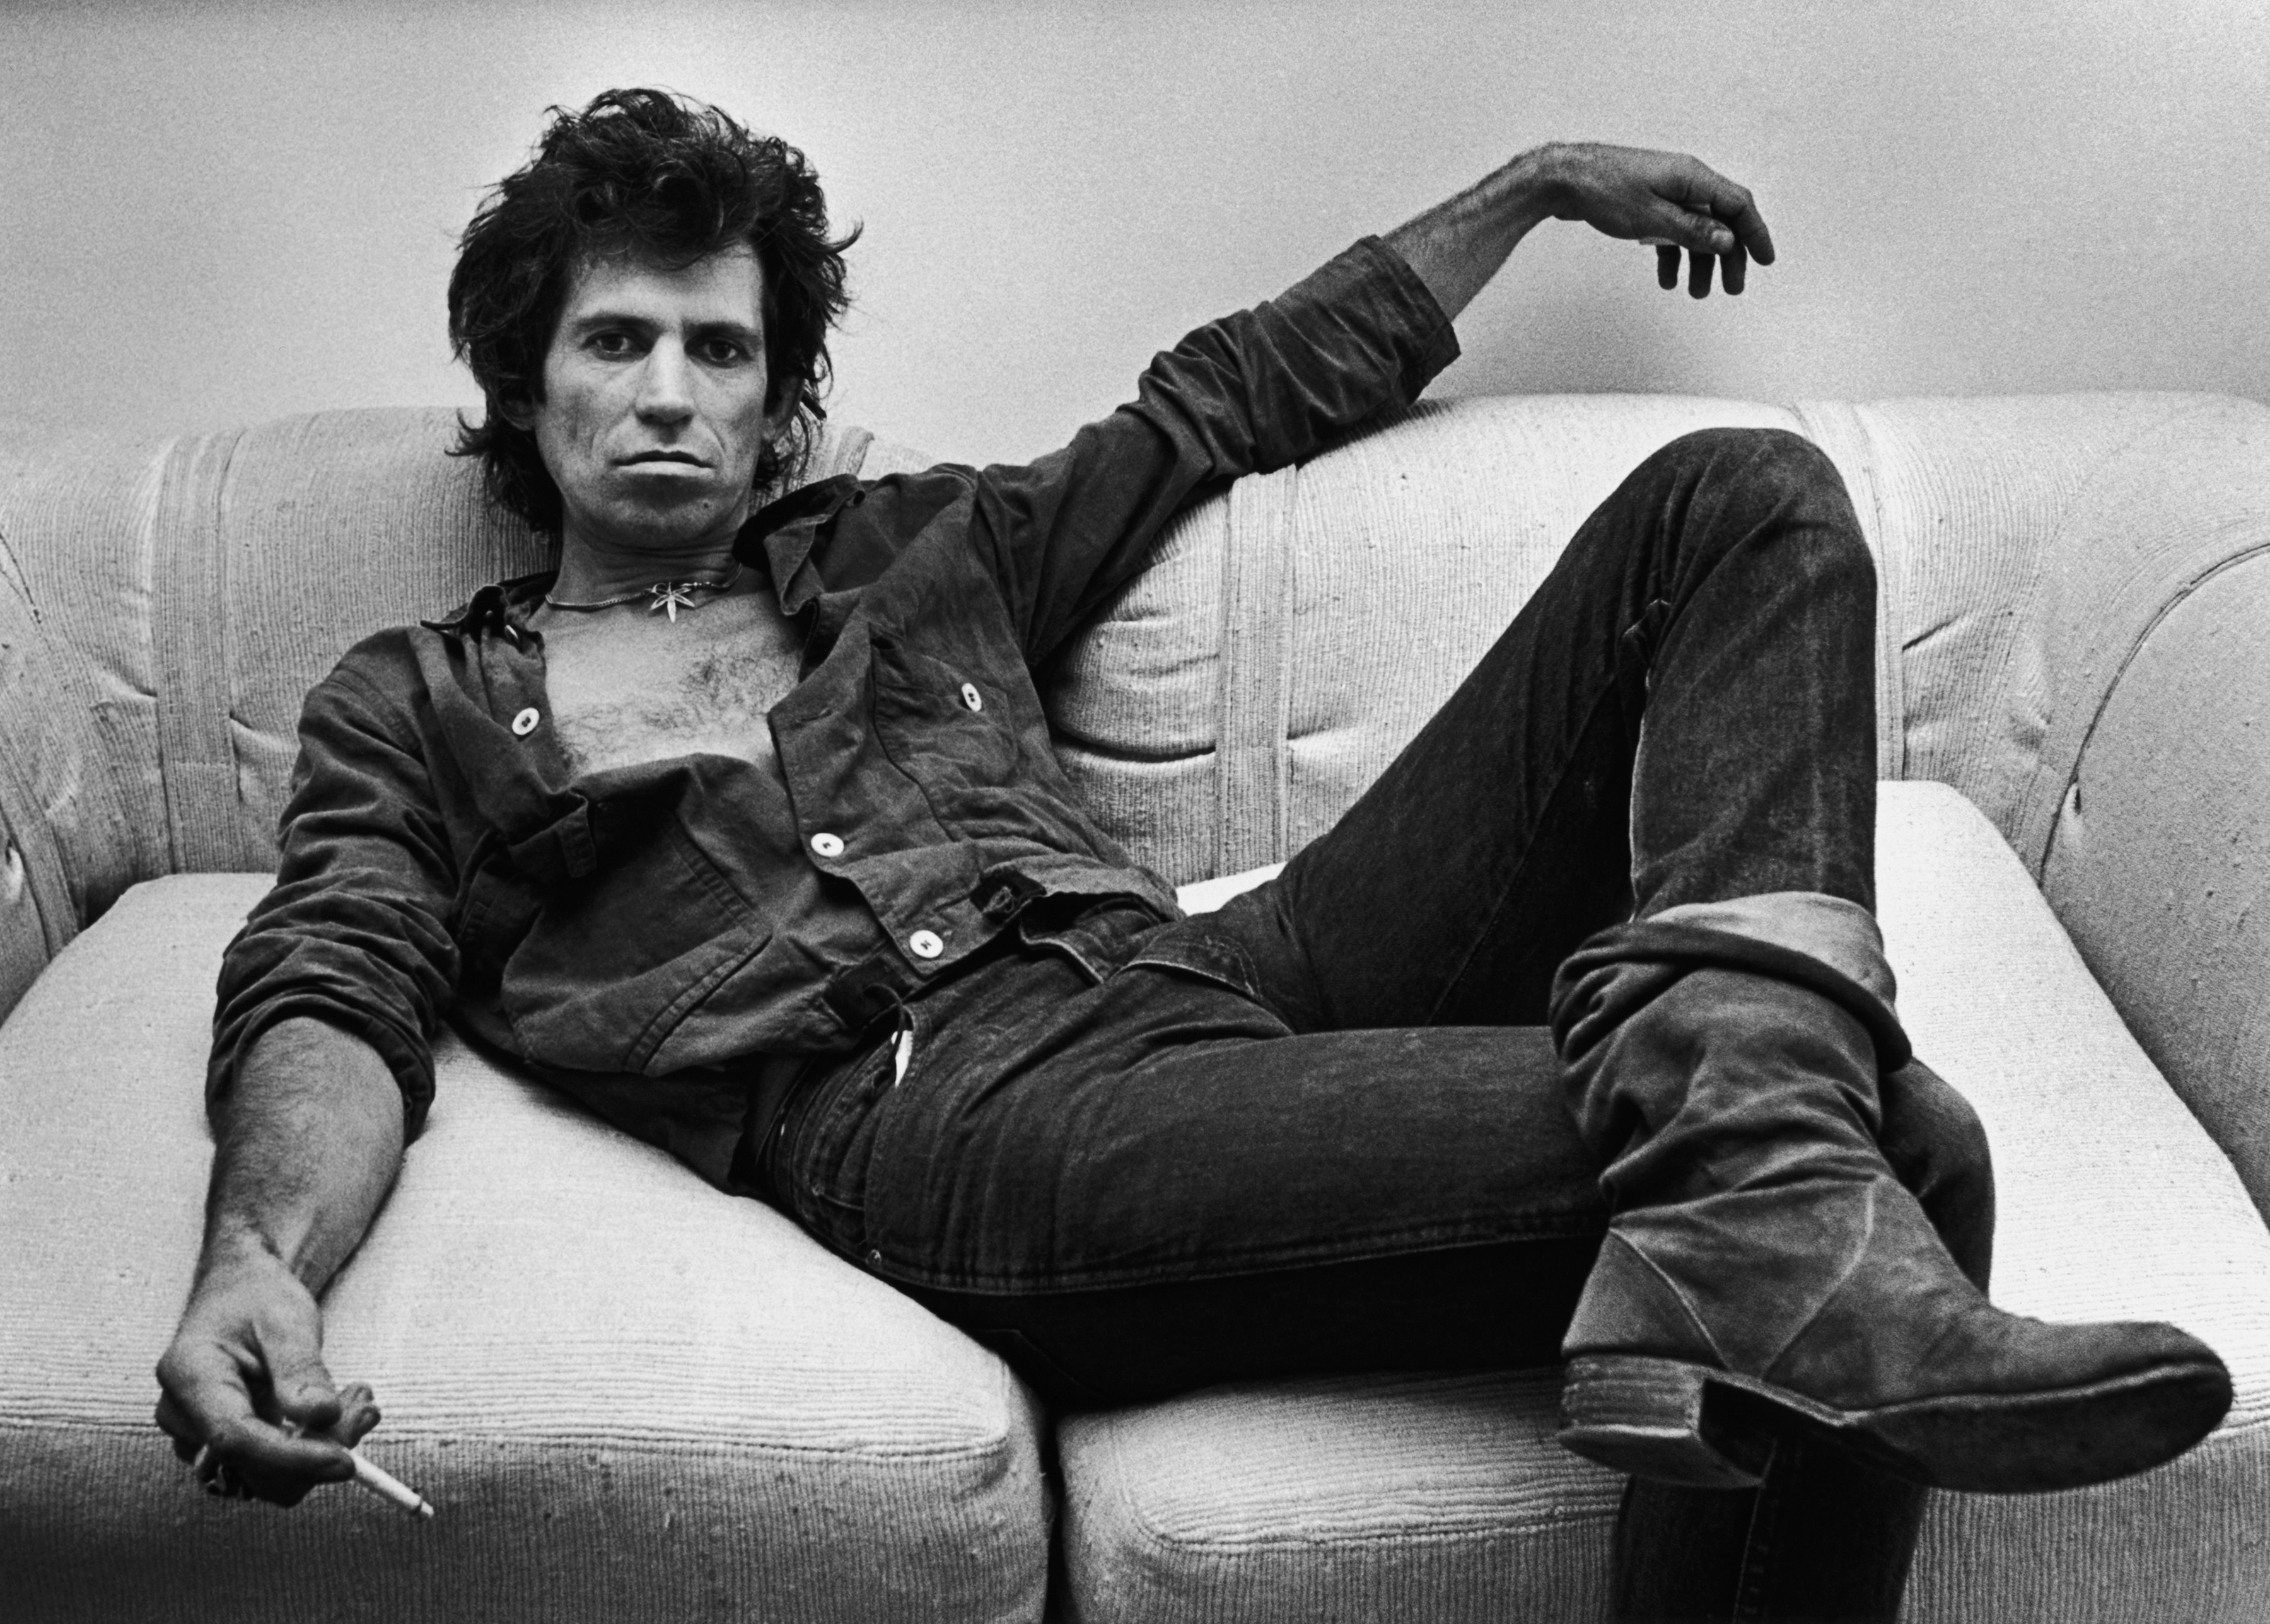 Keith Richards sitting on a couch